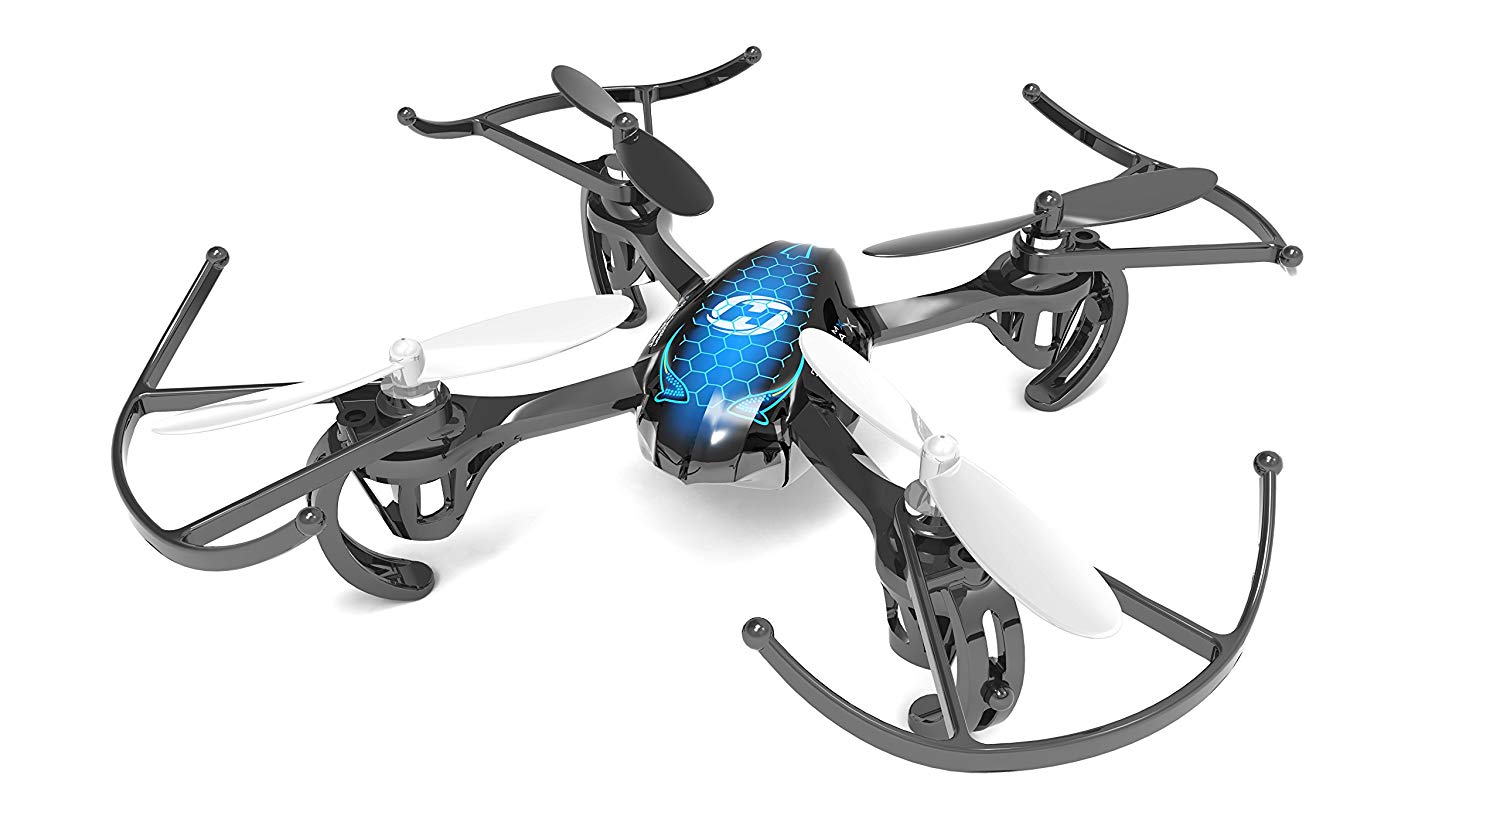 Holy Stone HS170 Predator Mini RC Helicopter Drone 2.4Ghz $29.99 (REG $50.00)